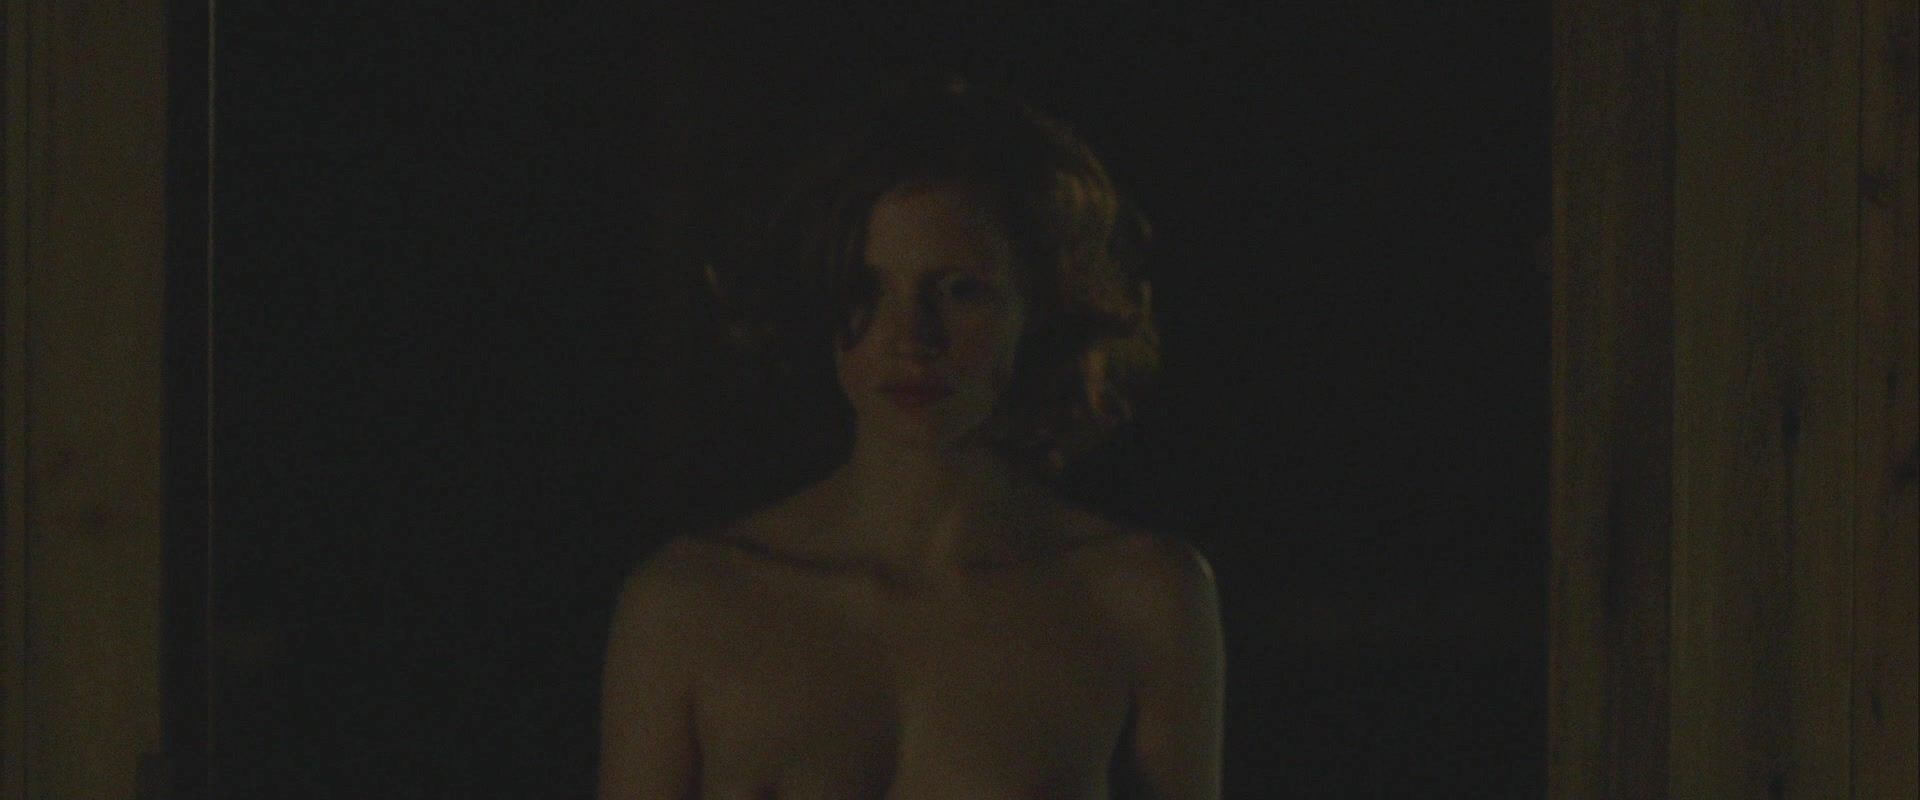 Boo.by Sex video Jessica Chastain, Mia Wasikowska - Lawless (2012) Qwebec